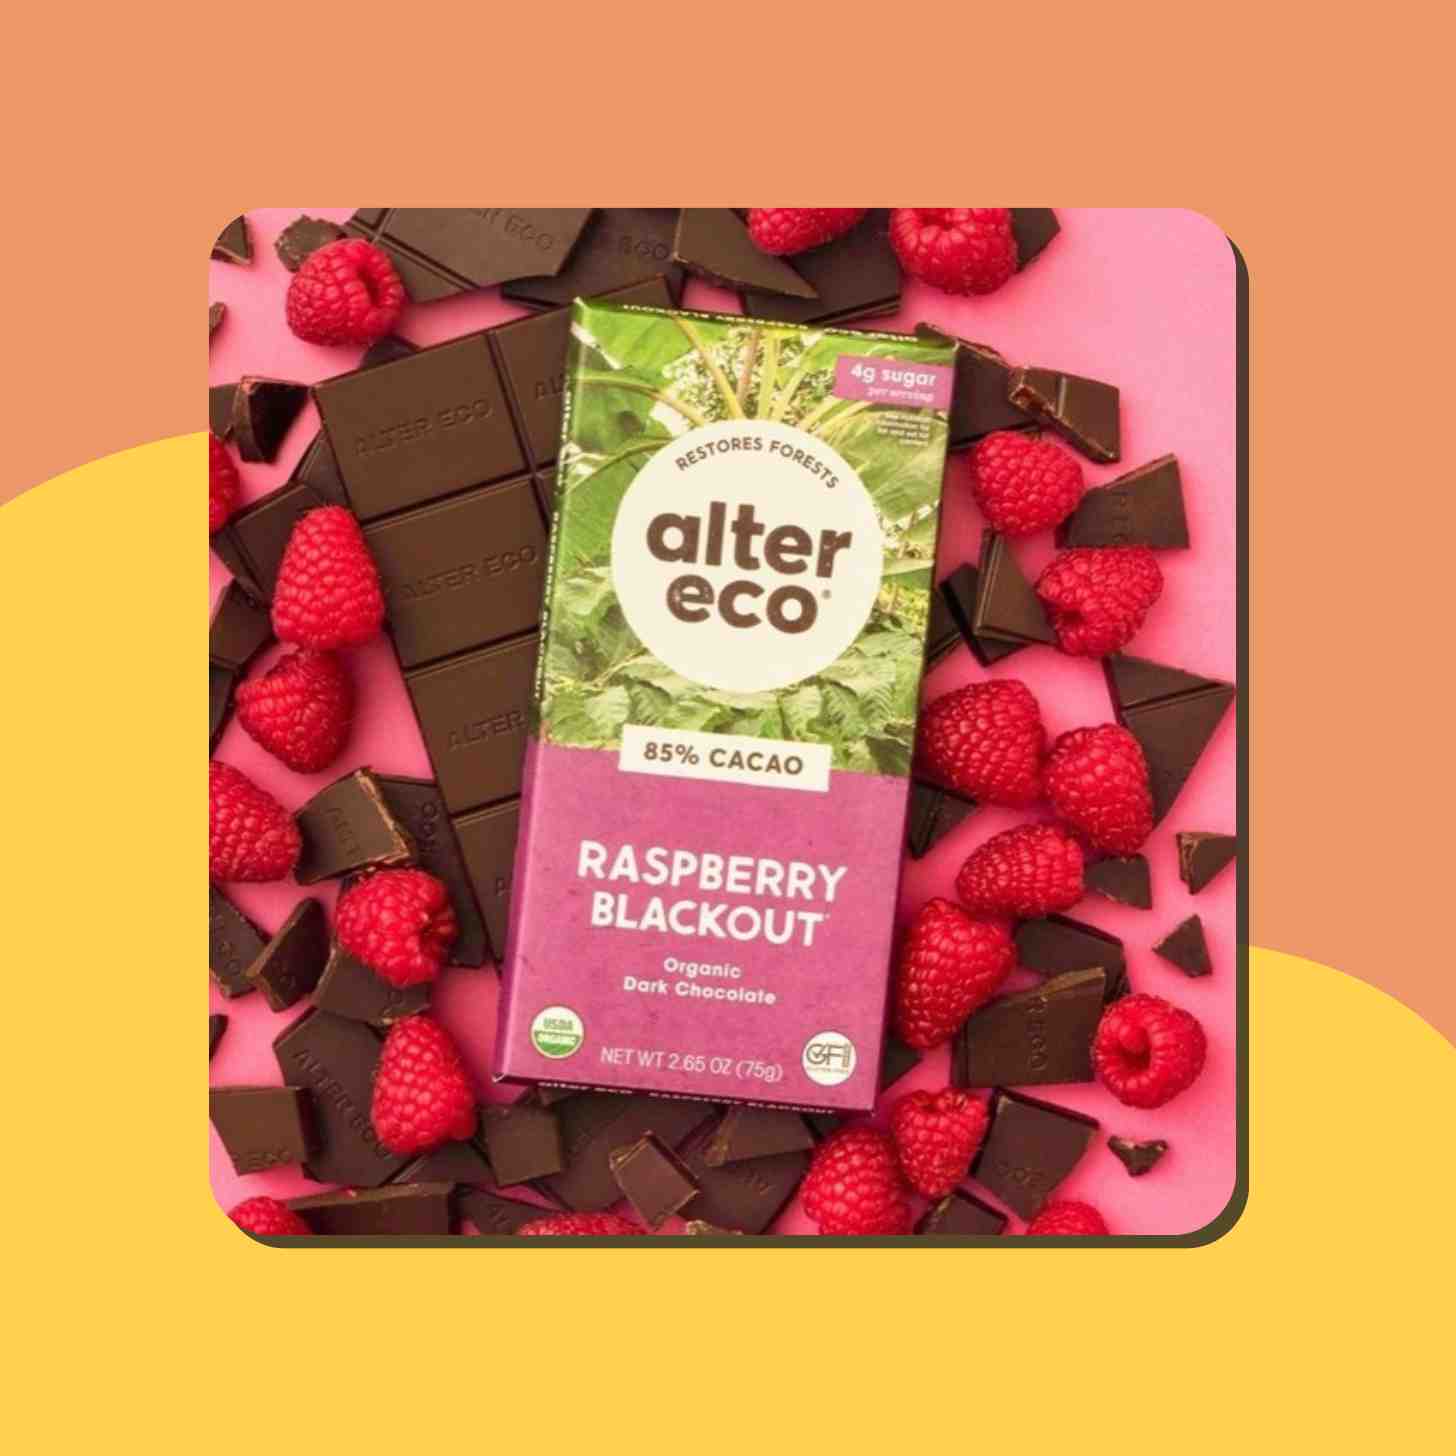 A Box Of Alter Eco 85% Cacao Raspberry Blackout Flavored Sitting On Top Of Its Chocolate And Berries